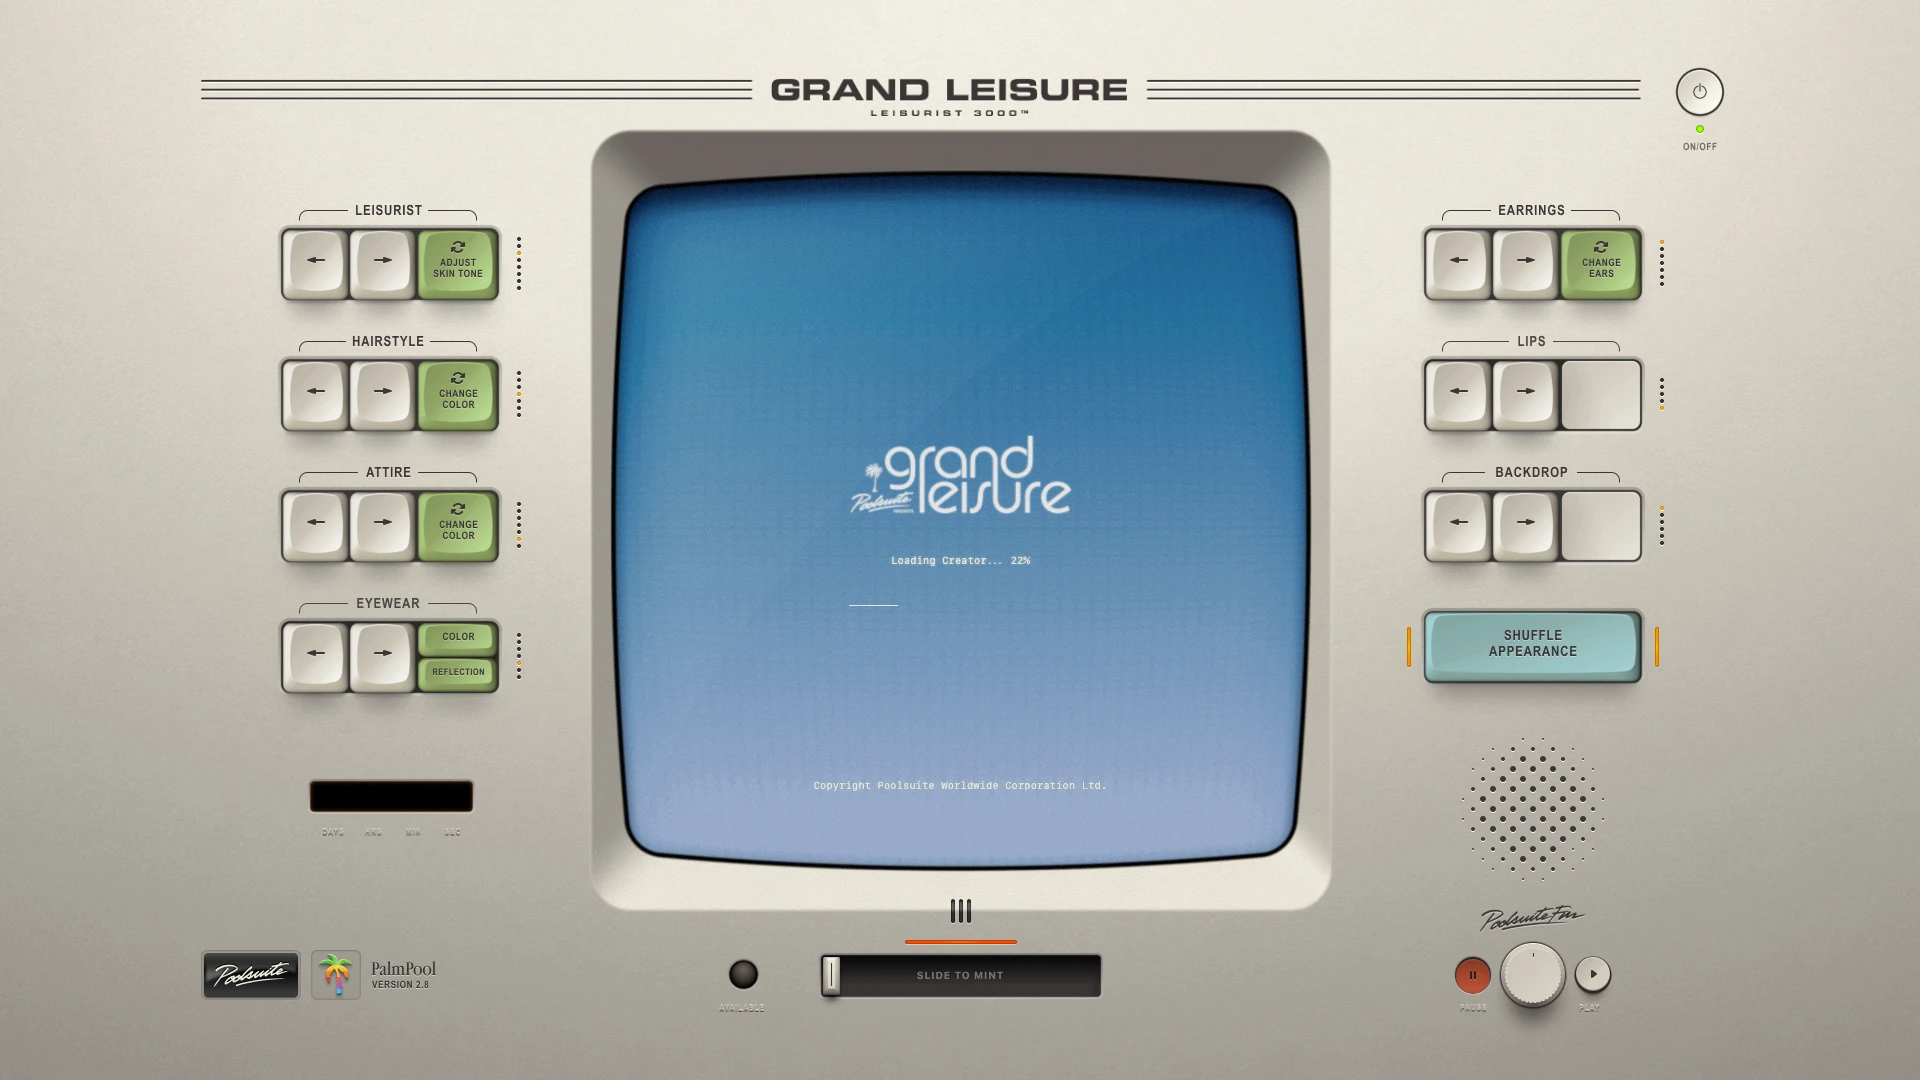 GRAND LEISURE ☼ By Poolsuite